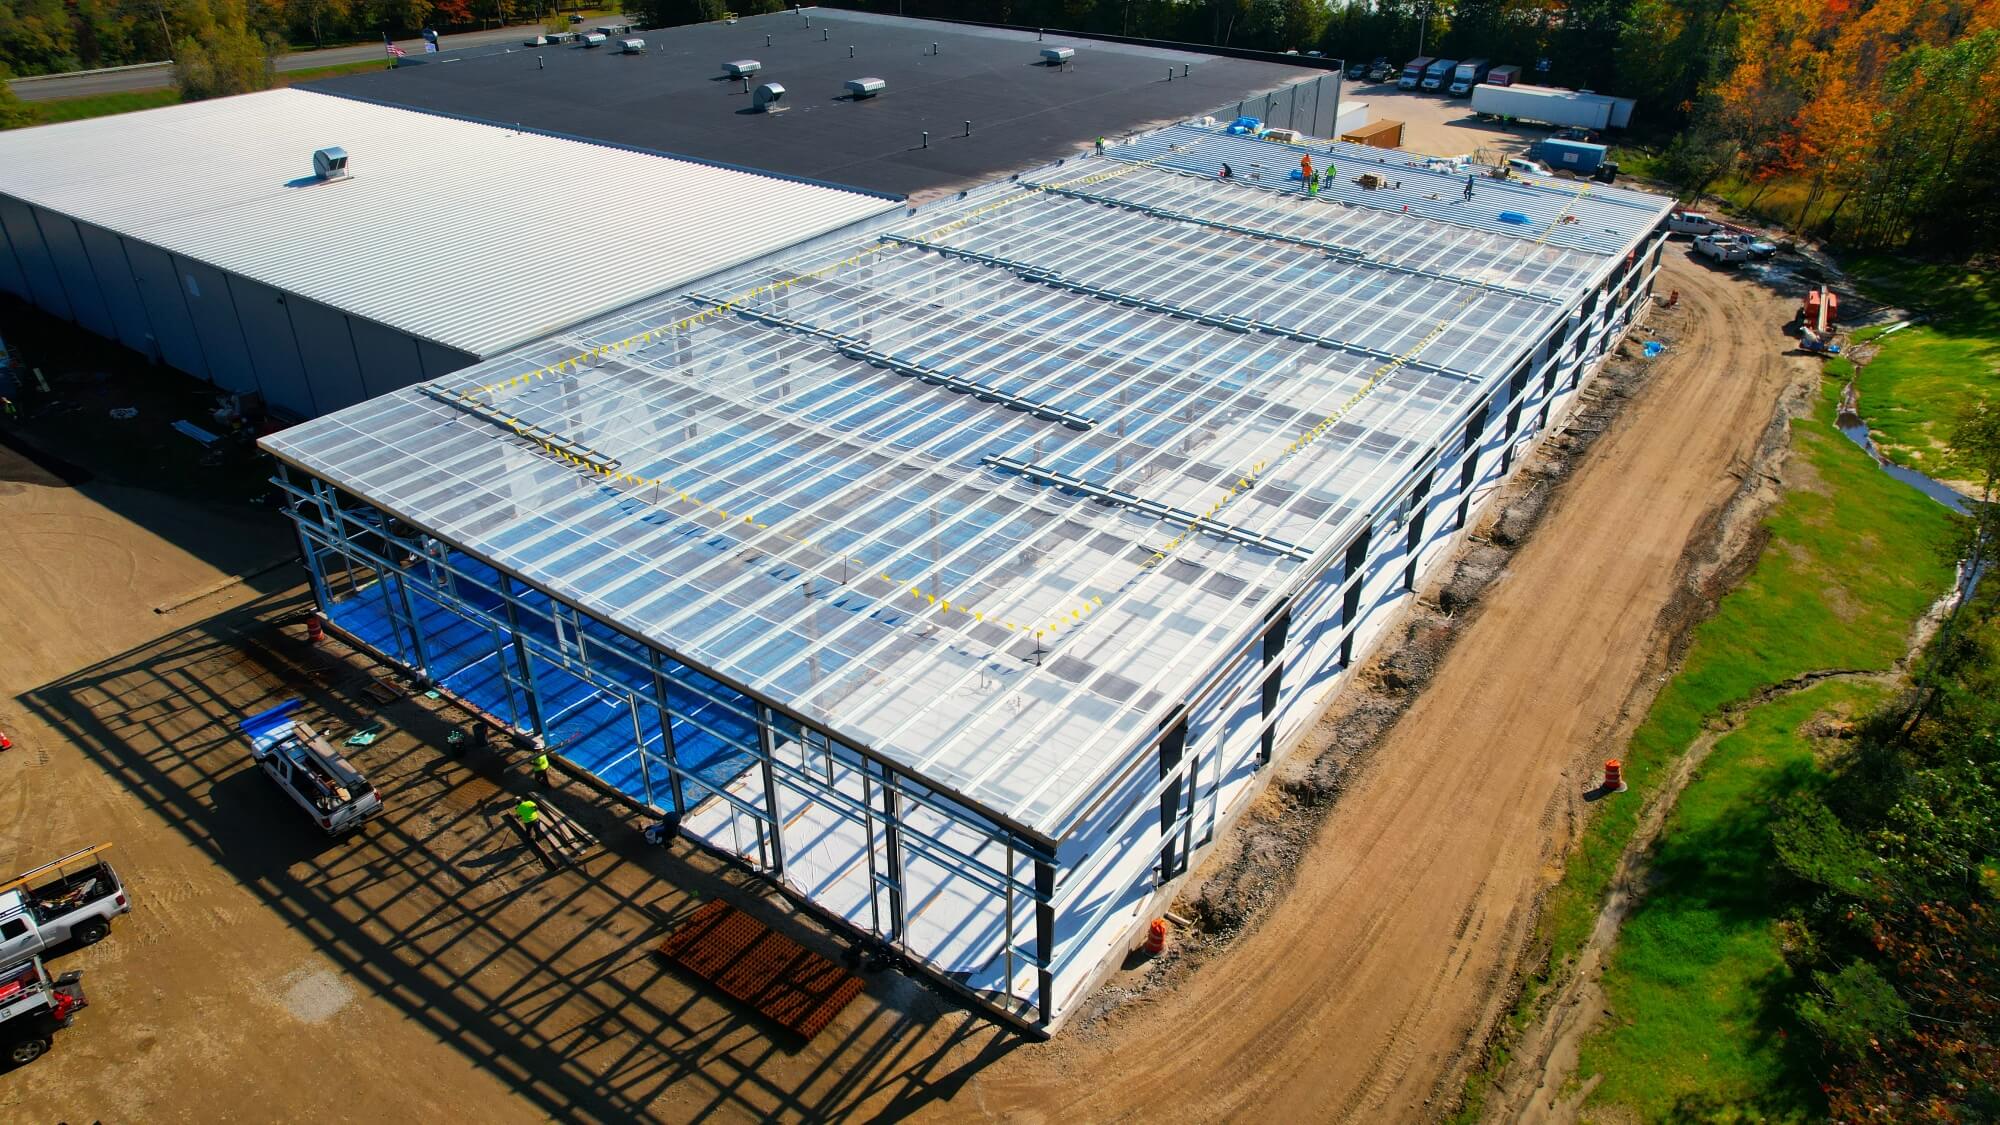 Later in the design / build process featuring a beverage distribution warehouse showing the pre-engineered metal building frame.